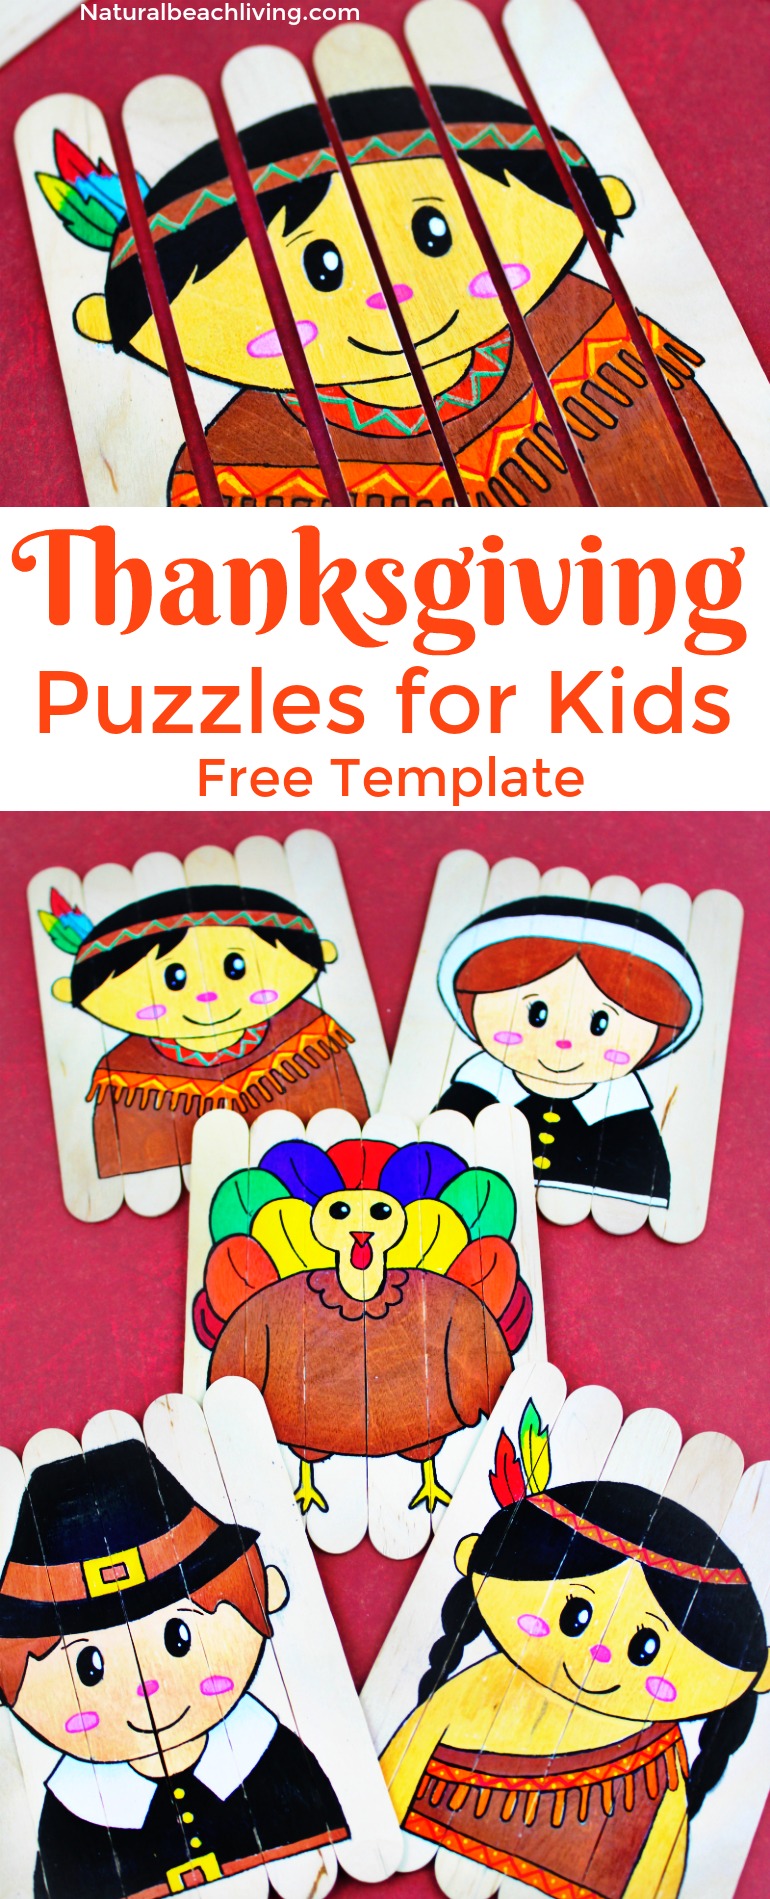 These Free Thanksgiving Printables are perfect for kids of all ages. You'll find a variety of fun Thanksgiving printables to practice gratitude, Thanksgiving games, decorate for Thanksgiving, and several hands-on learning ideas with a Thanksgiving theme. Thanksgiving Activity Pages 